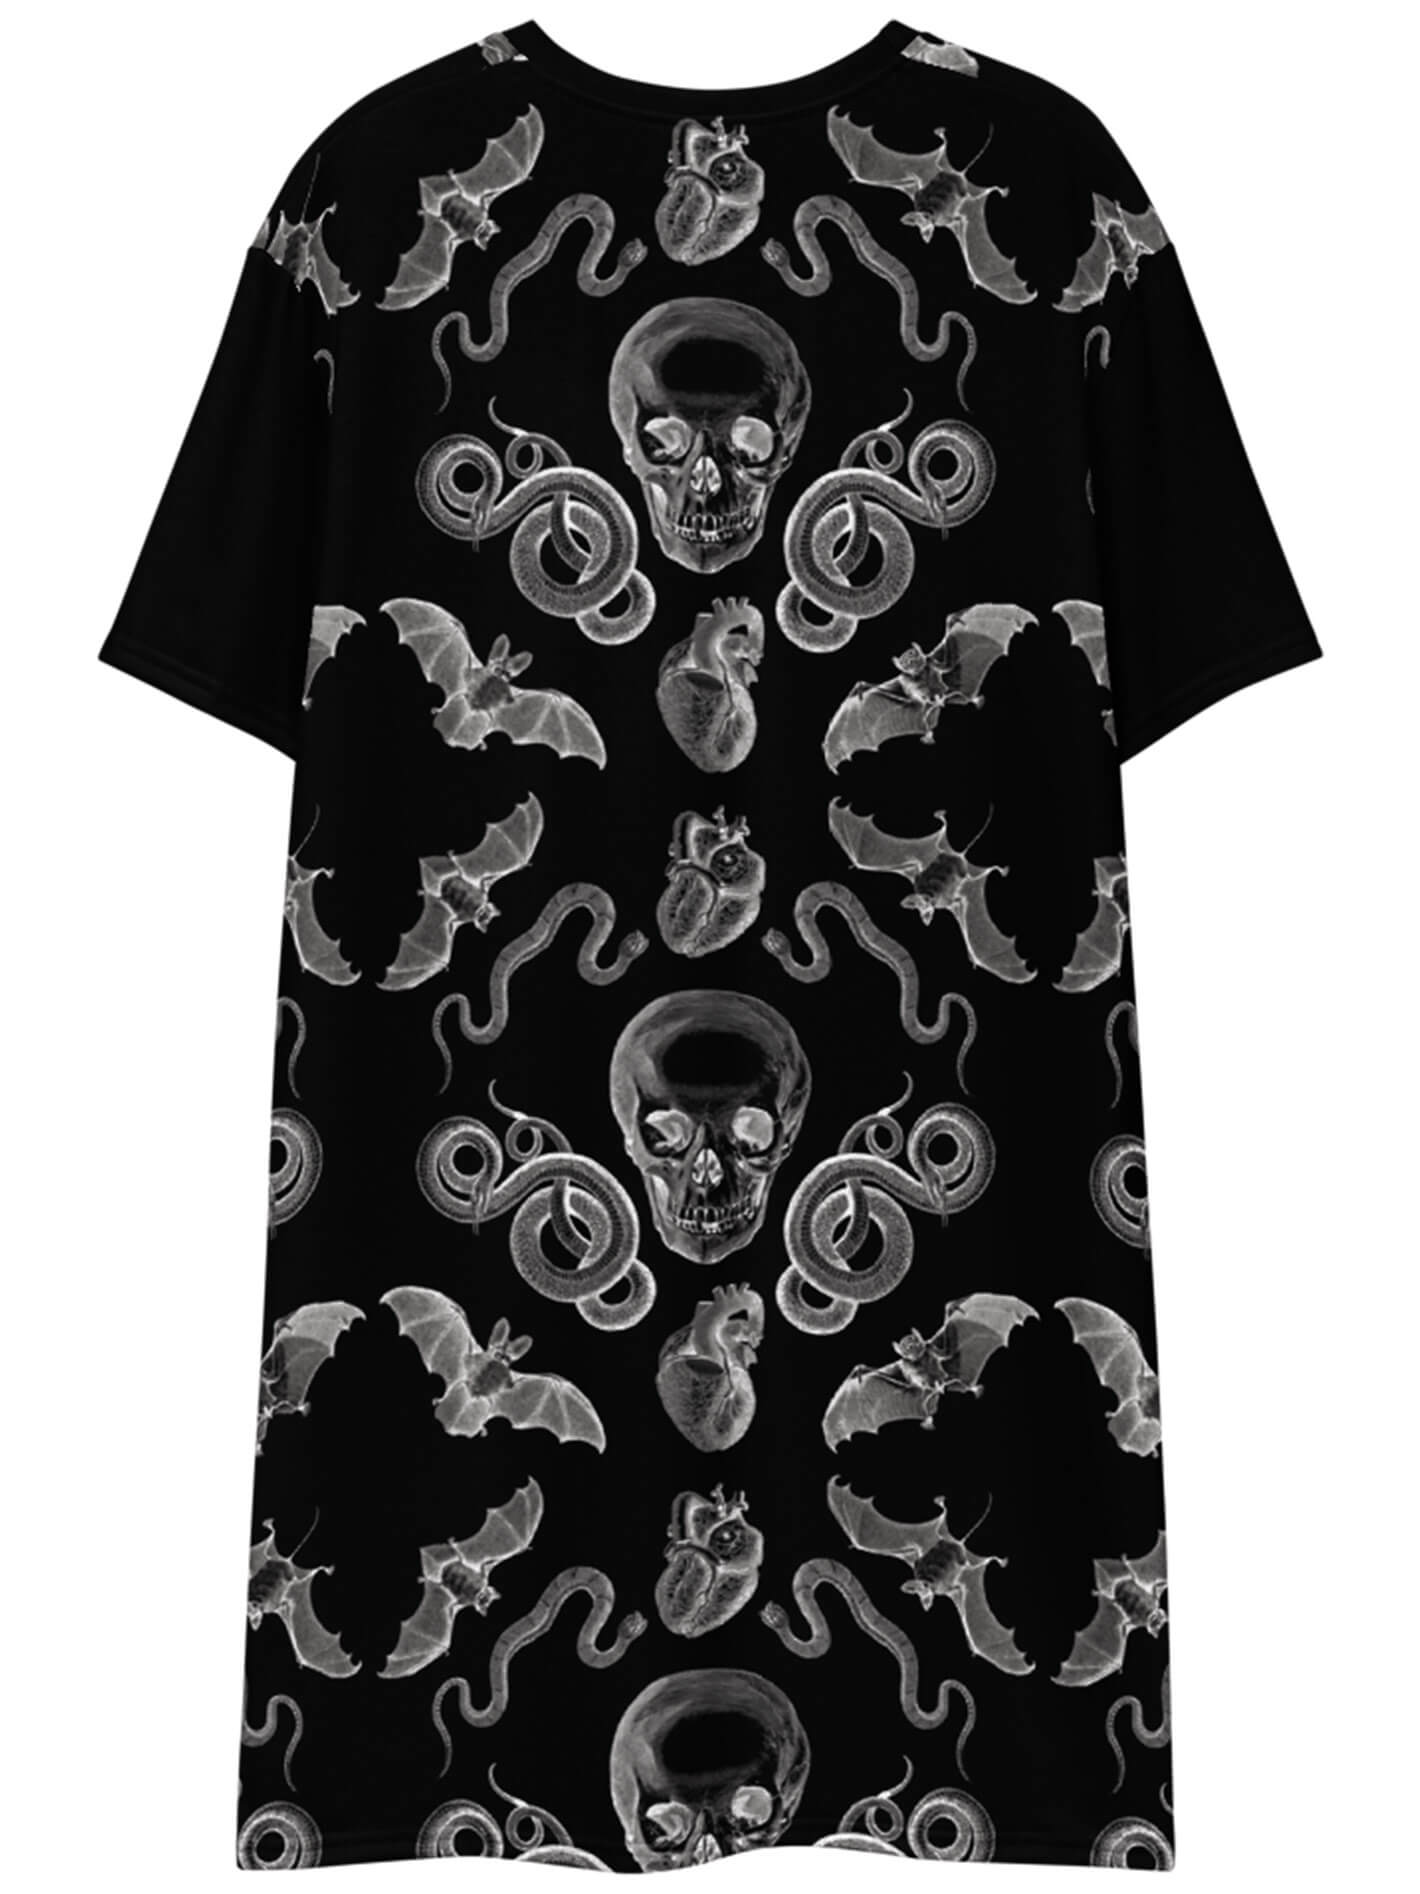 Traditional gothic t-shirt dress.